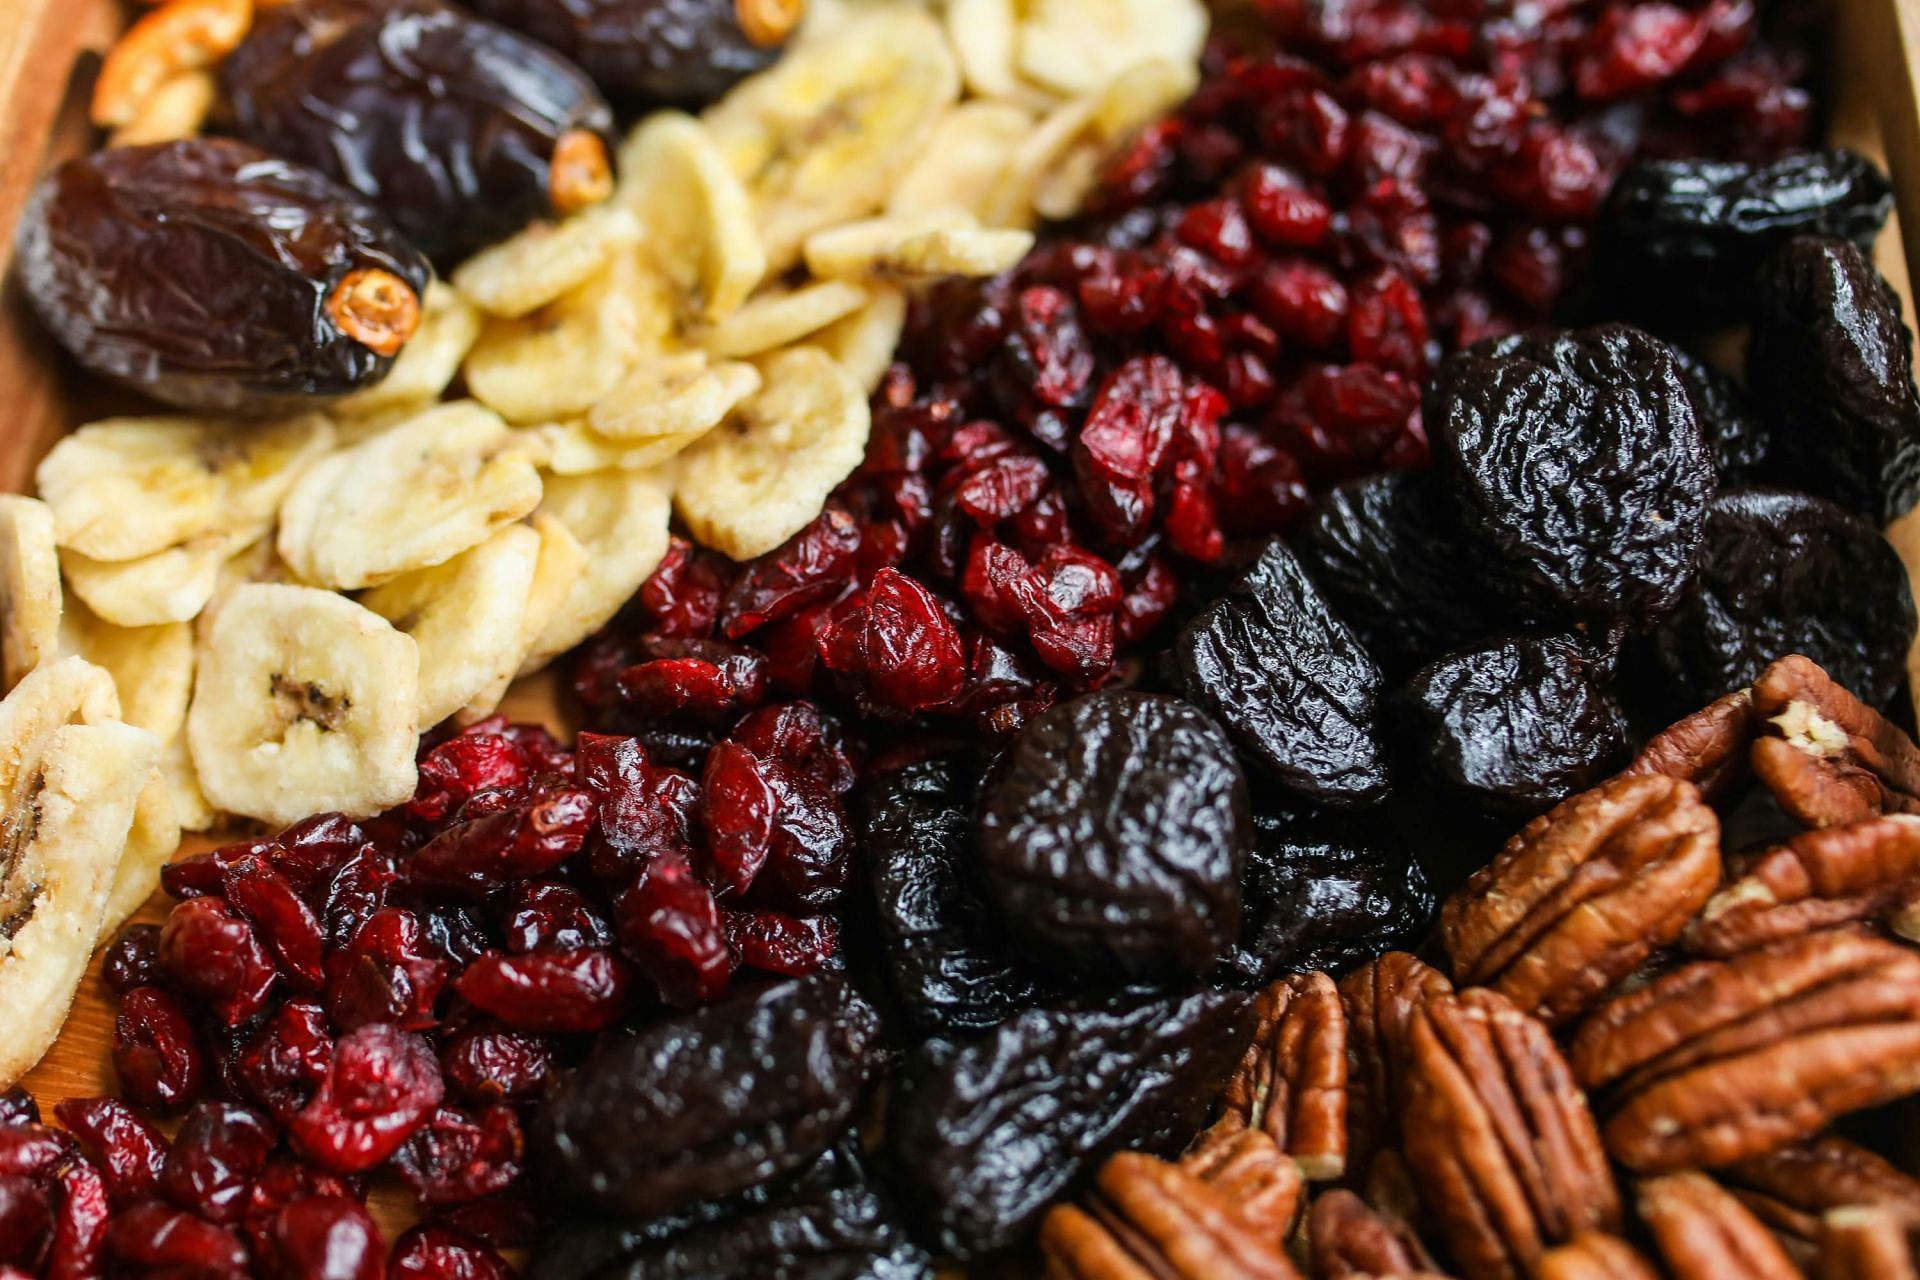 foods to avoid for optimum sleep (Image sourced via Pexels / Photo by Polina)